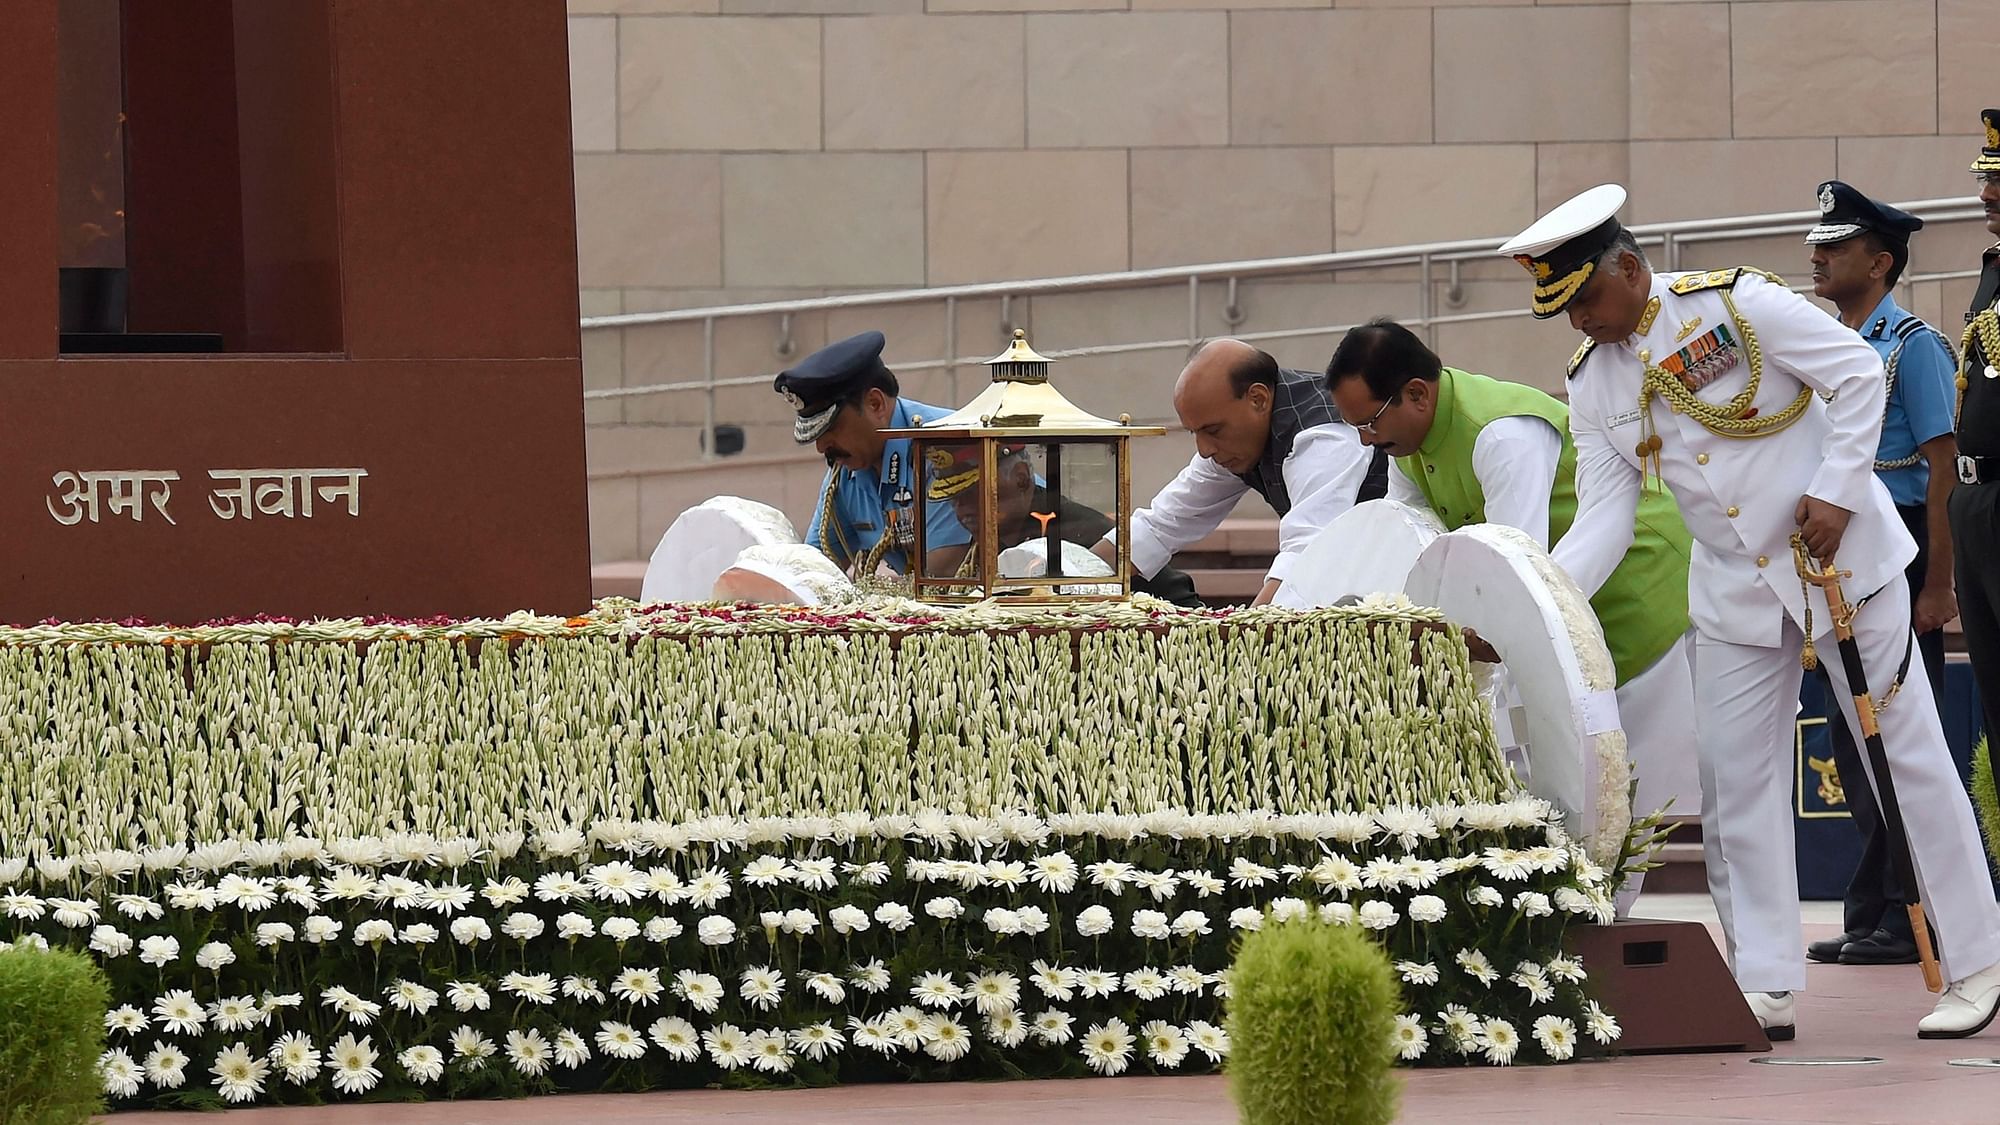  Defence Minister Rajnath Singh lays a wreath at National War Memorial on the occasion of ‘Kargil Diwas’ in New Delhi on Friday, 26 July.